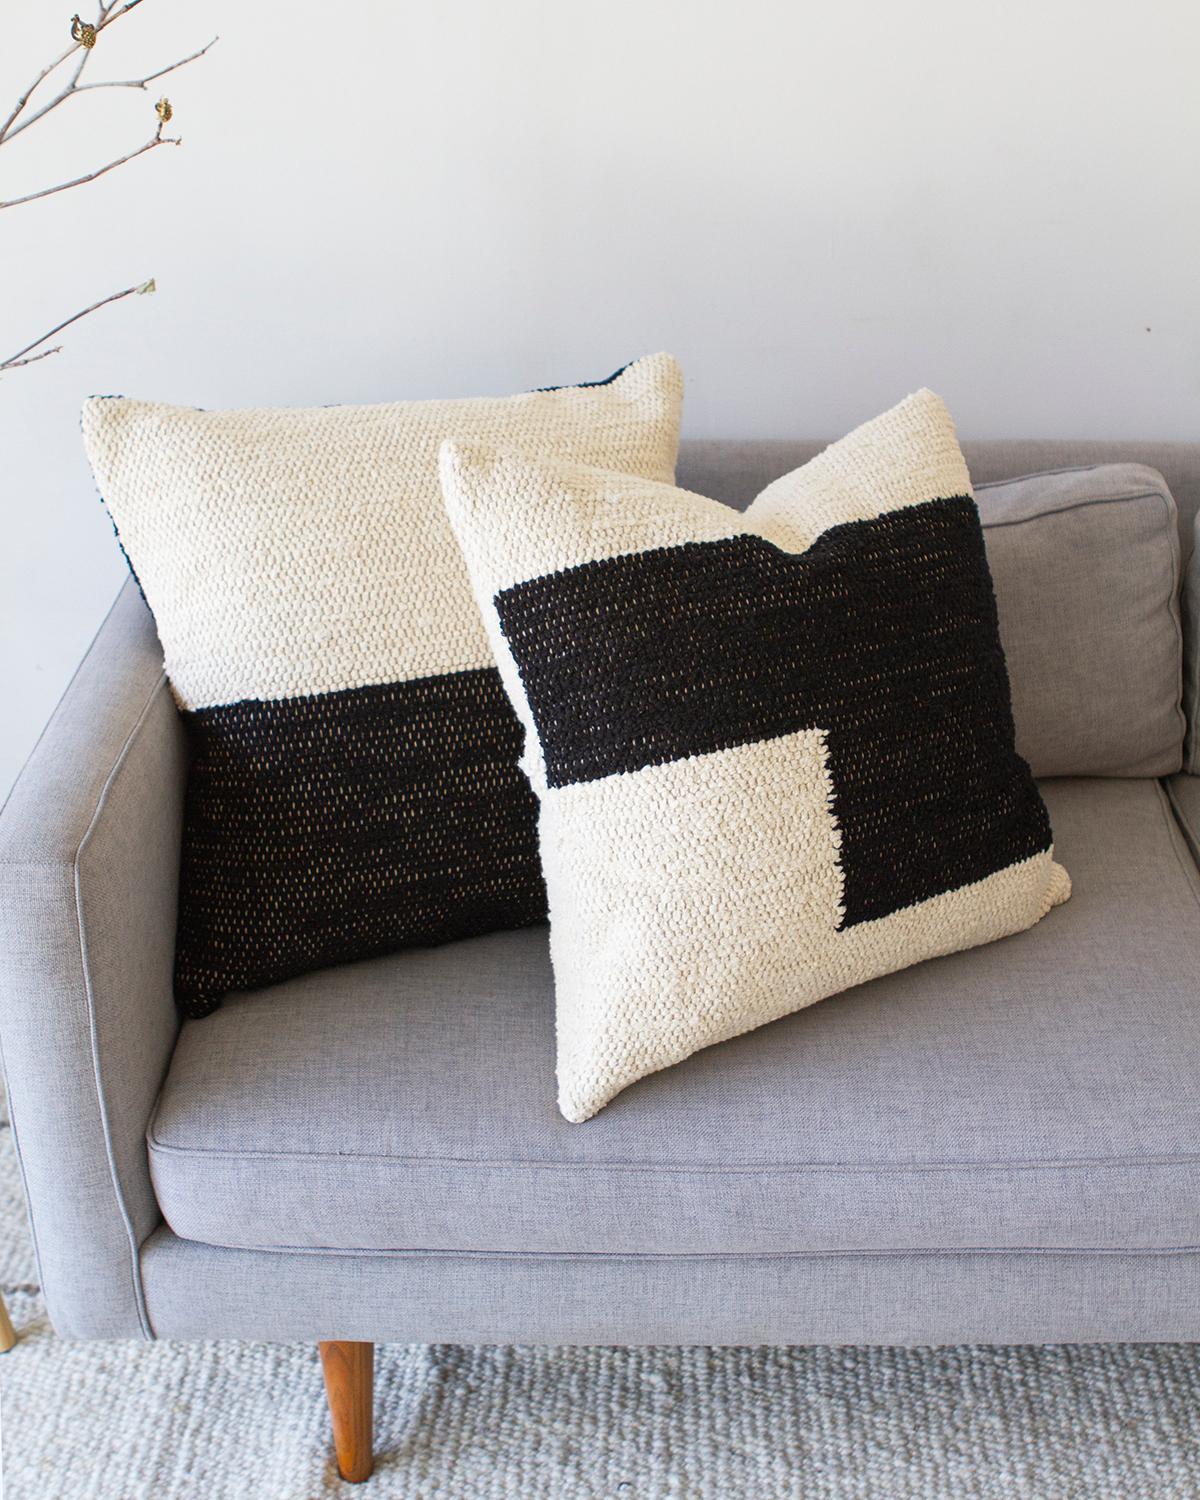 Great, bold, graphic gray and cream color block pillow made of 100% re-cycled cotton left over from the fashion industry, from one of the mother countries, Portugal. This hand woven throw pillow will look stylish in any Mid-Century Modern or